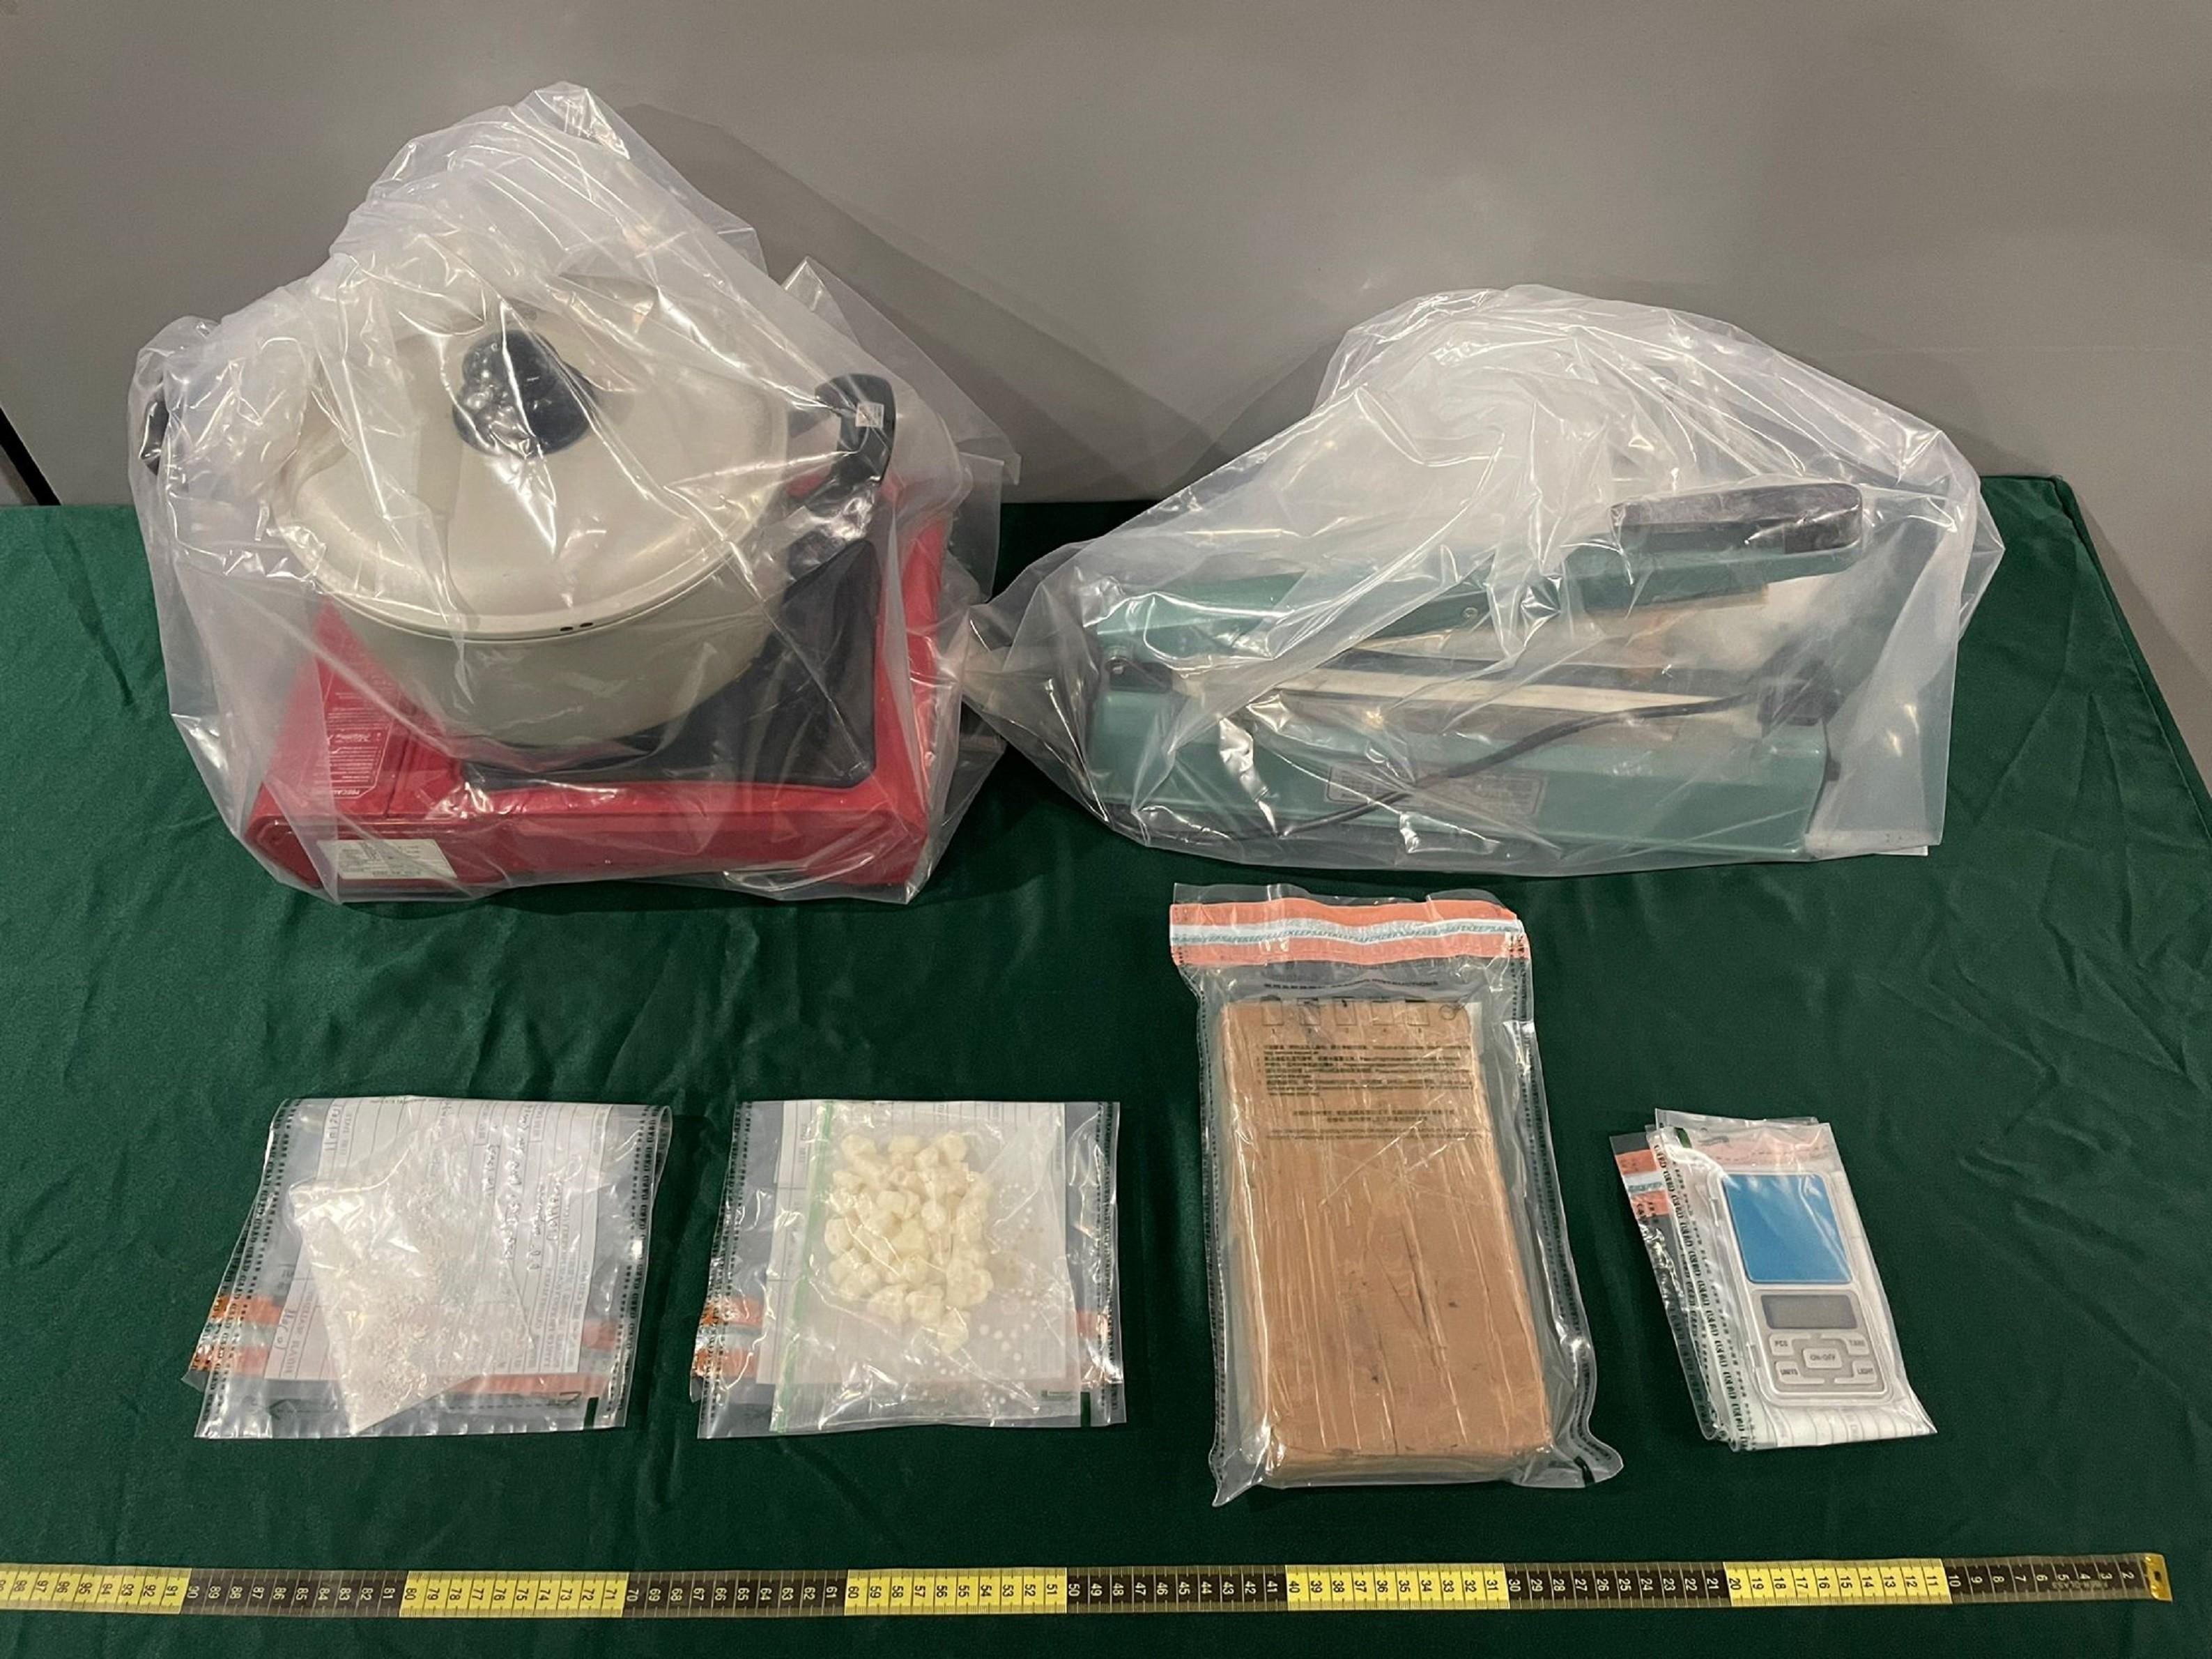 Hong Kong Customs detected two dangerous drugs cases on March 18 and yesterday (April 1), and seized a total of about 3.6 kilograms of suspected ketamine, about 1 kg of suspected cocaine and about 60 grams of suspected crack cocaine at Hong Kong International Airport and Tin Shui Wai. The total estimated market value was about $3.1 million. Photo shows the suspected cocaine, suspected crack cocaine and a batch of drug manufacturing and packaging paraphernalia seized by Customs officers in the second case.


